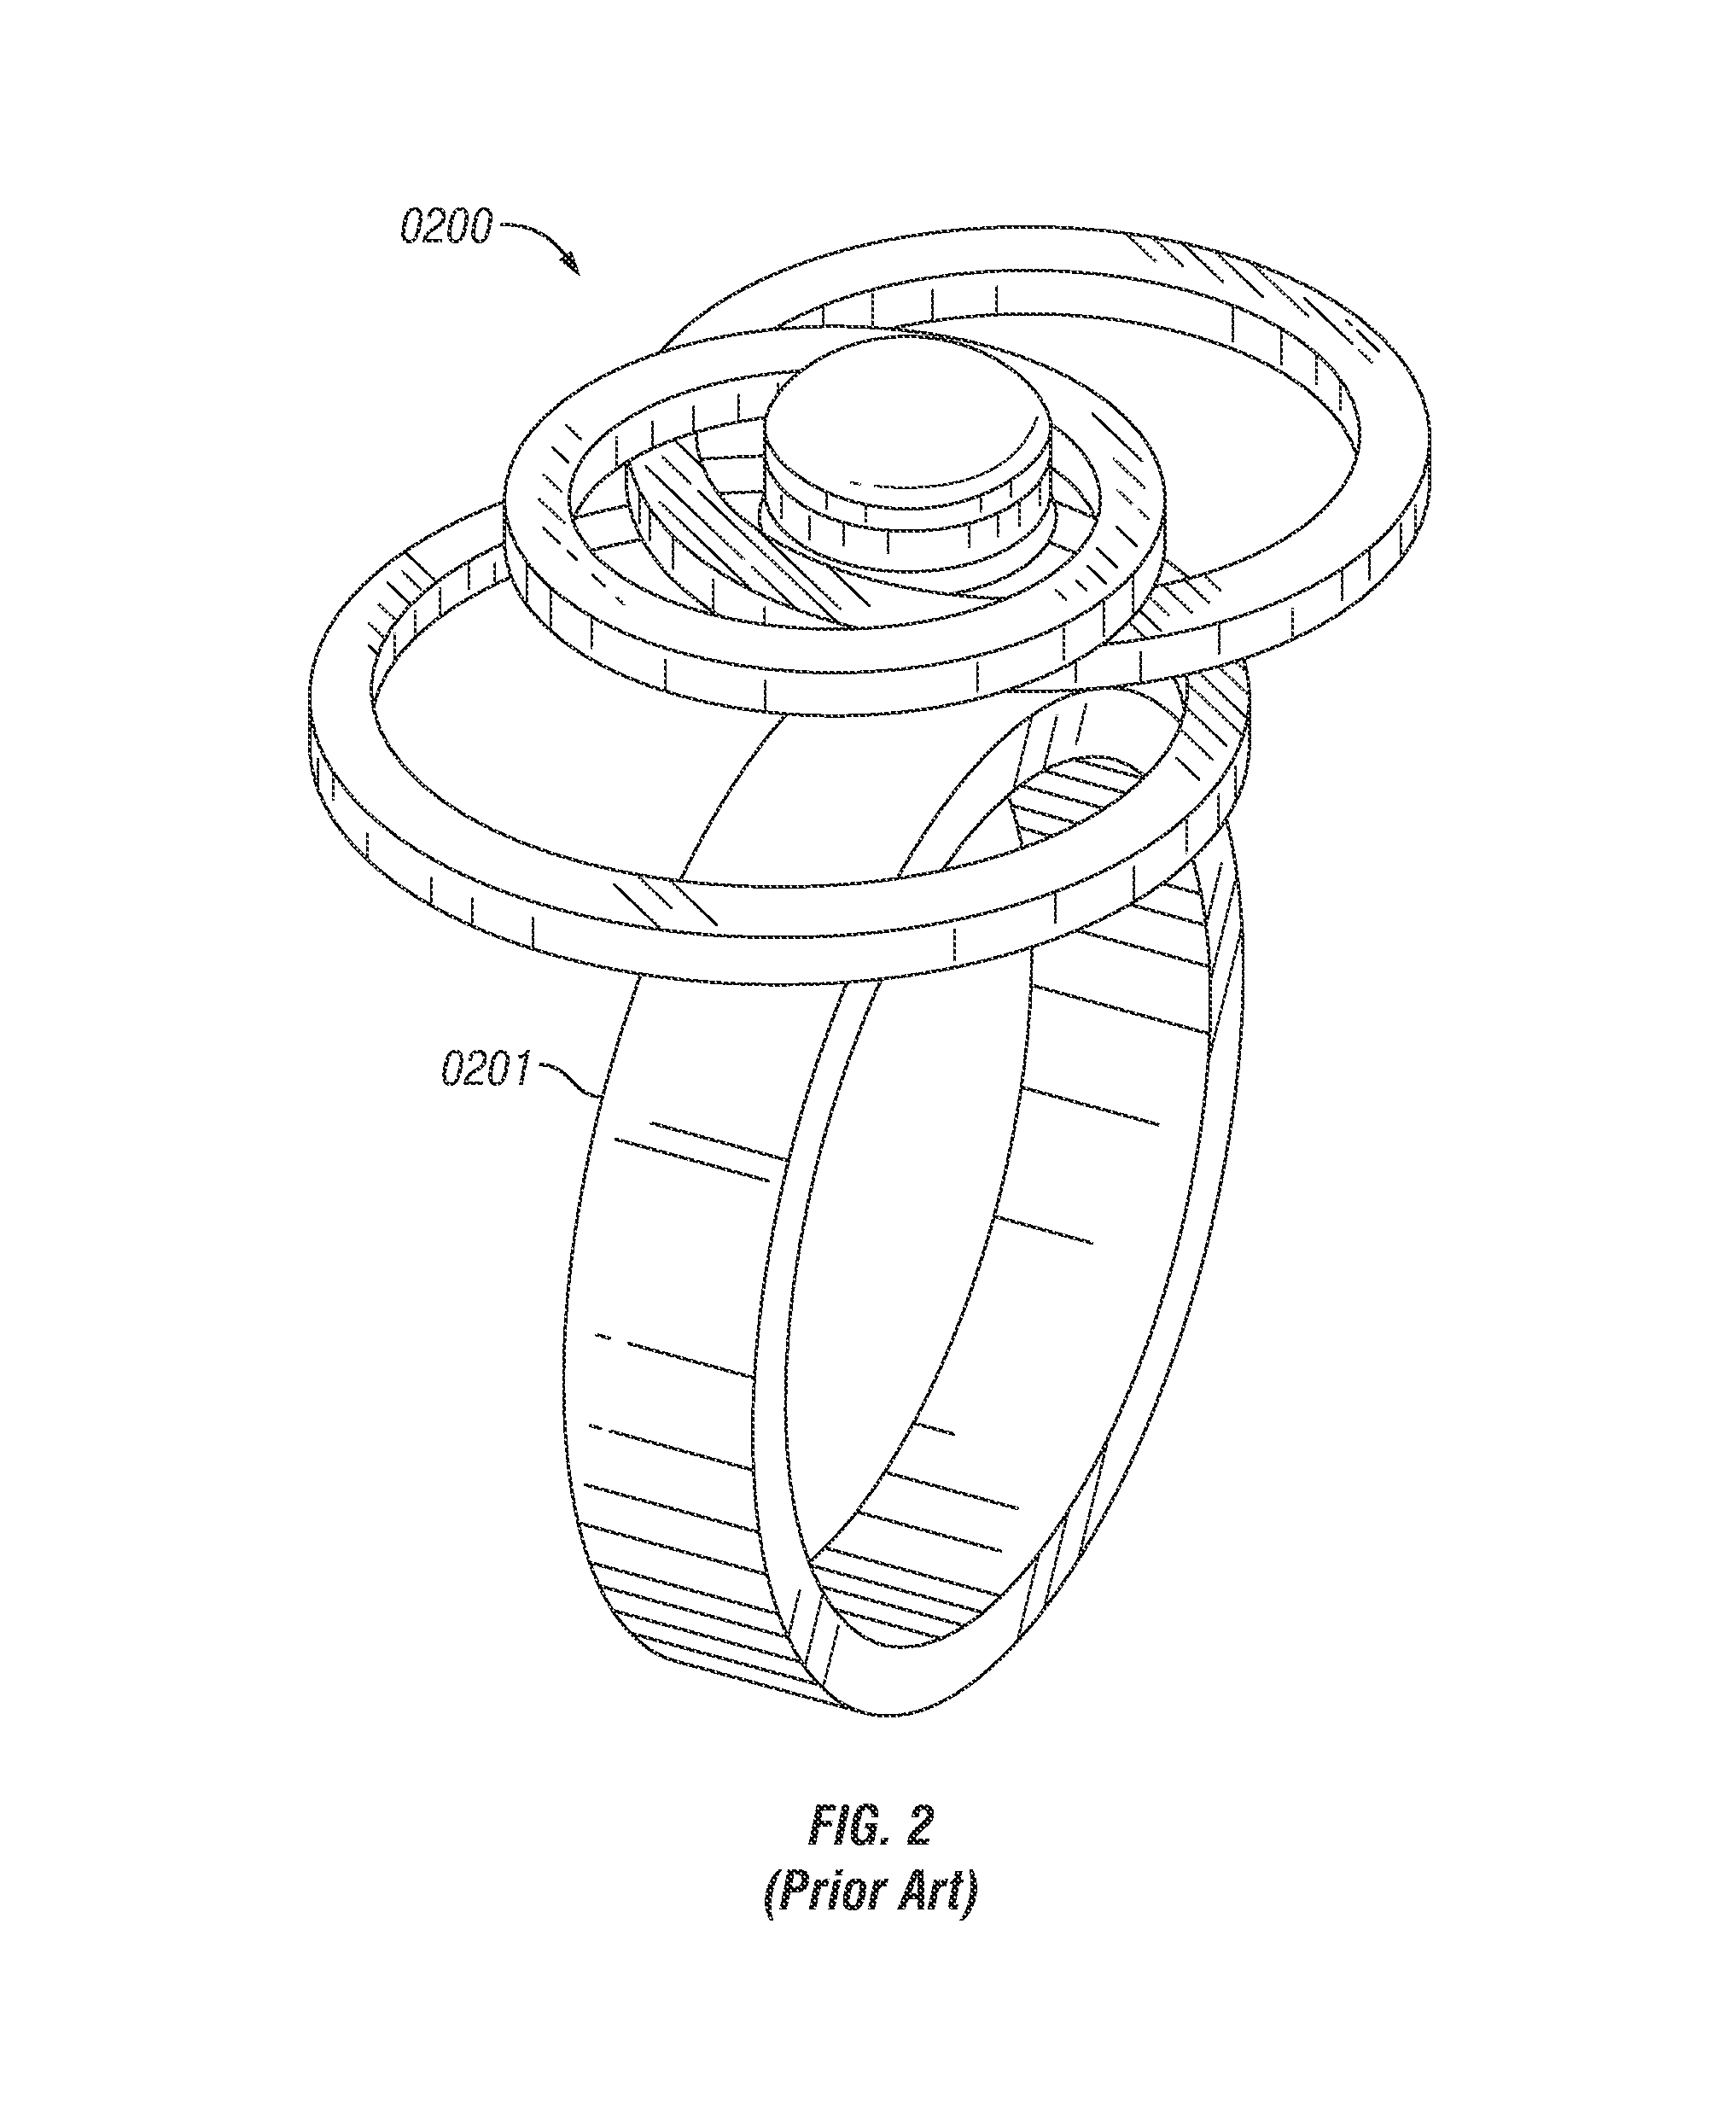 Jewelry ornament system and method